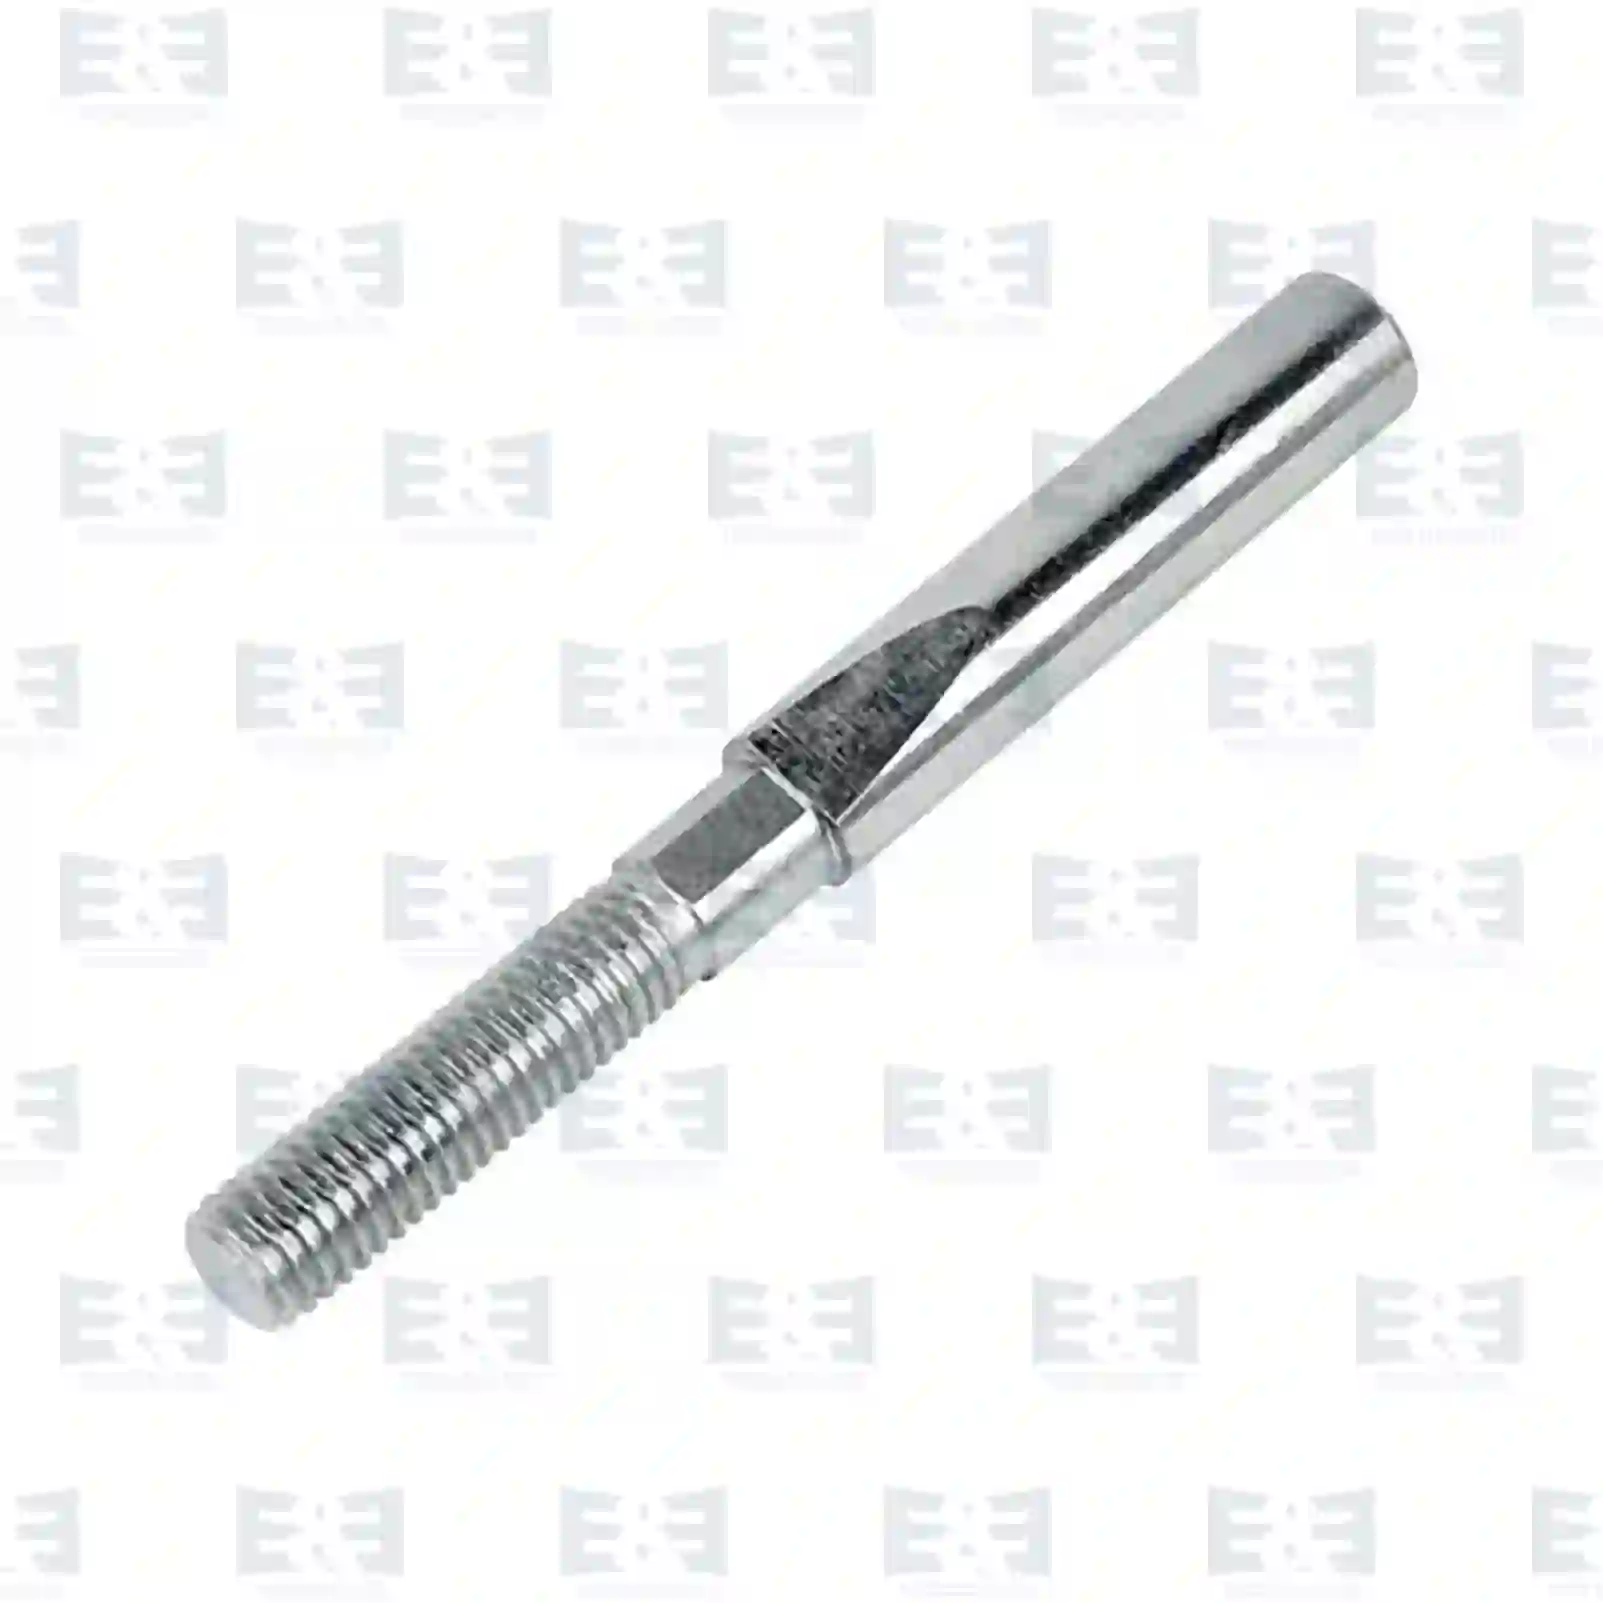  Bolt, steering knuckle || E&E Truck Spare Parts | Truck Spare Parts, Auotomotive Spare Parts